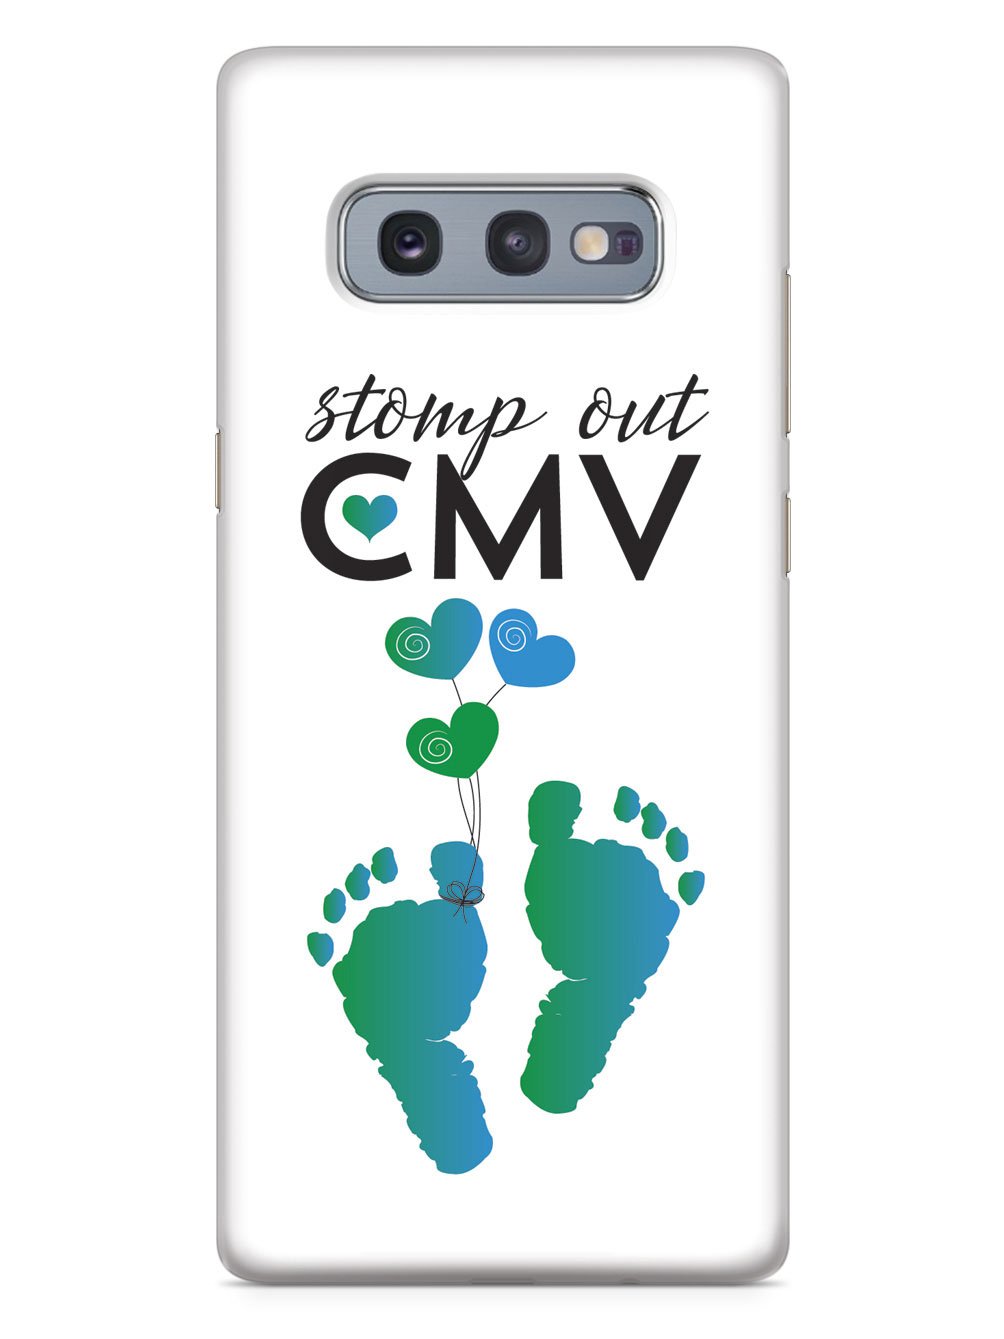 Stomp out Cytomegalovirus Case